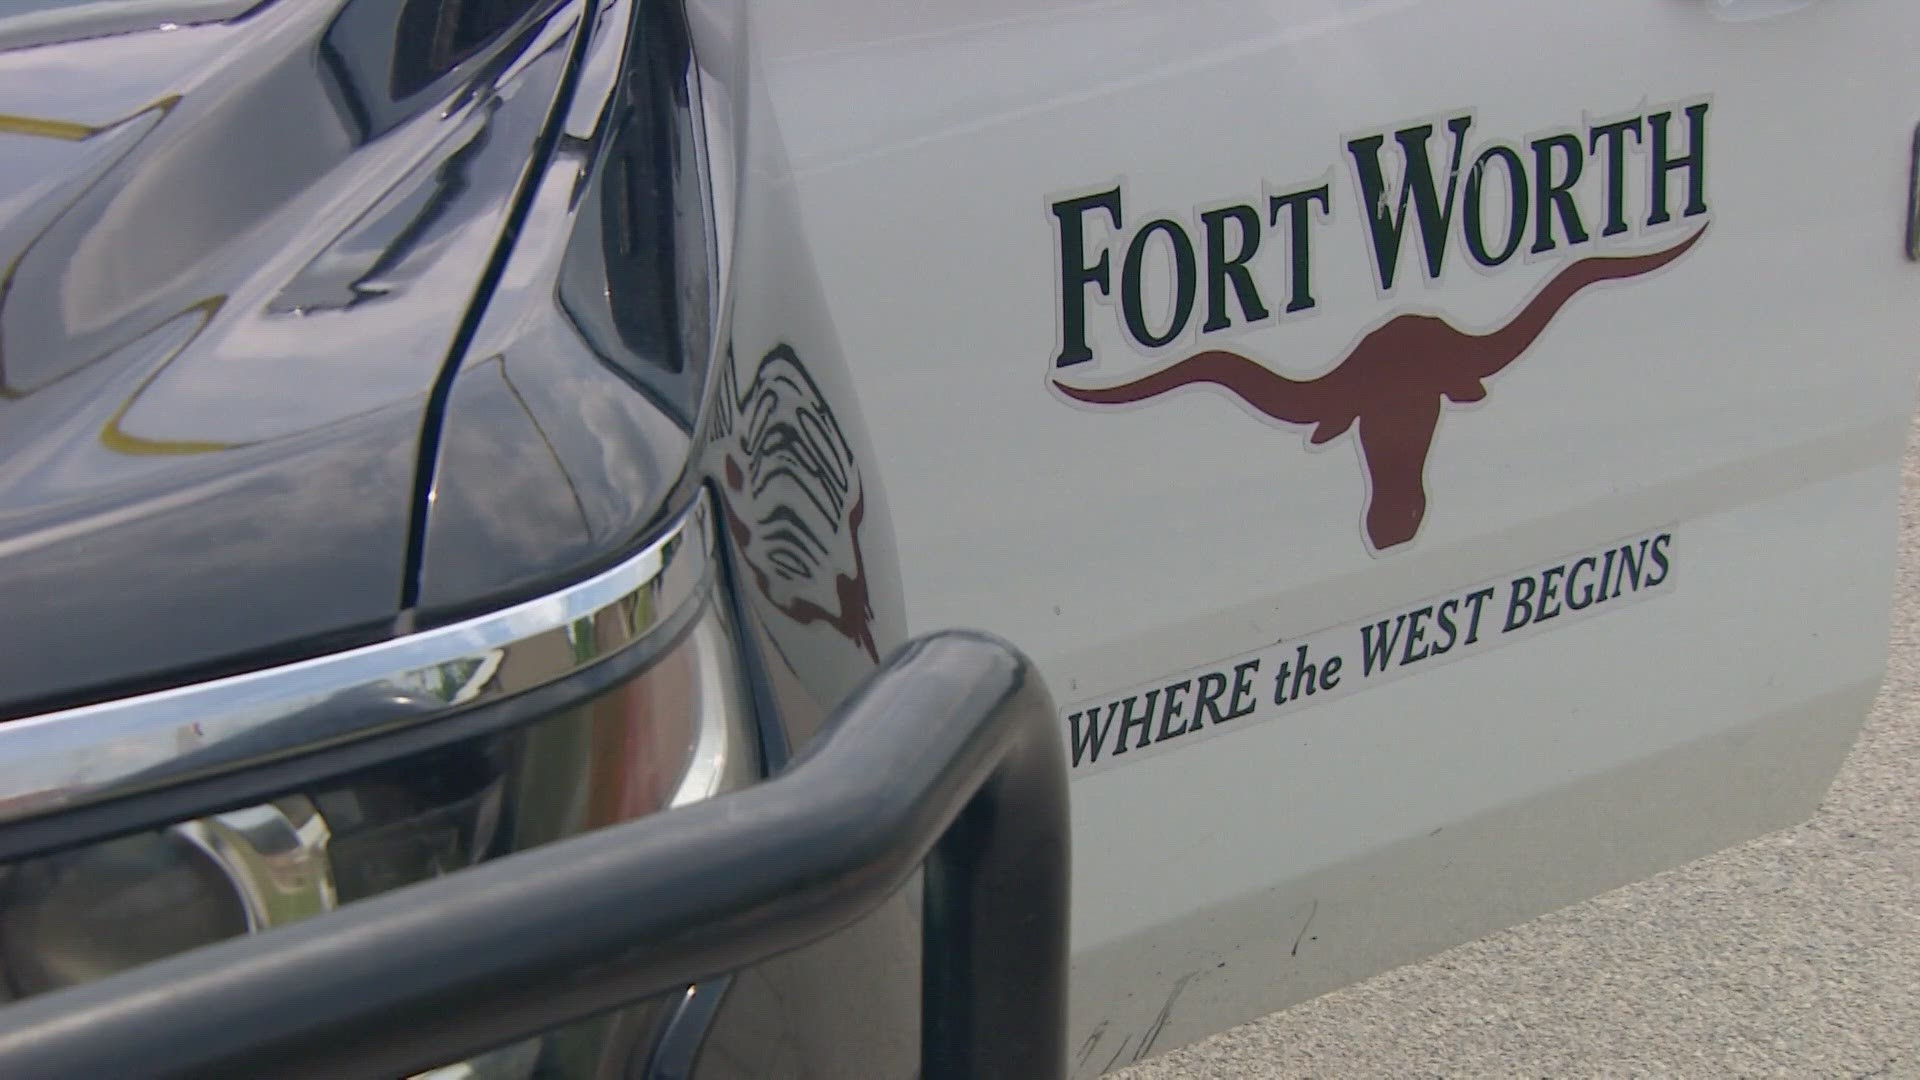 Police Chief Neil Noakes told Fort Worth council members that the community advisory board has already met three times.